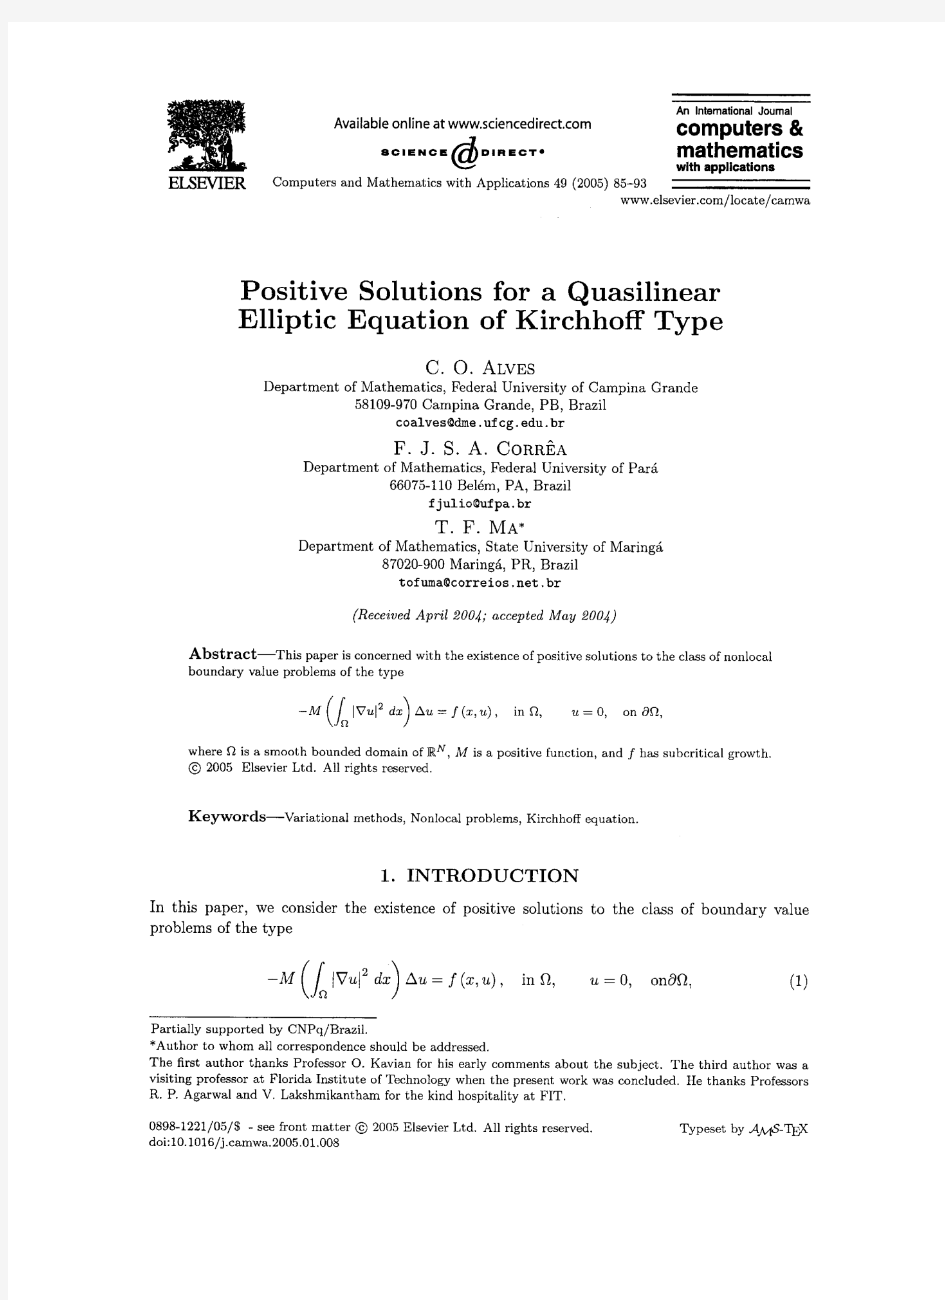 Positive solutions for a quasilinear elliptic equation of Kirchhoff type